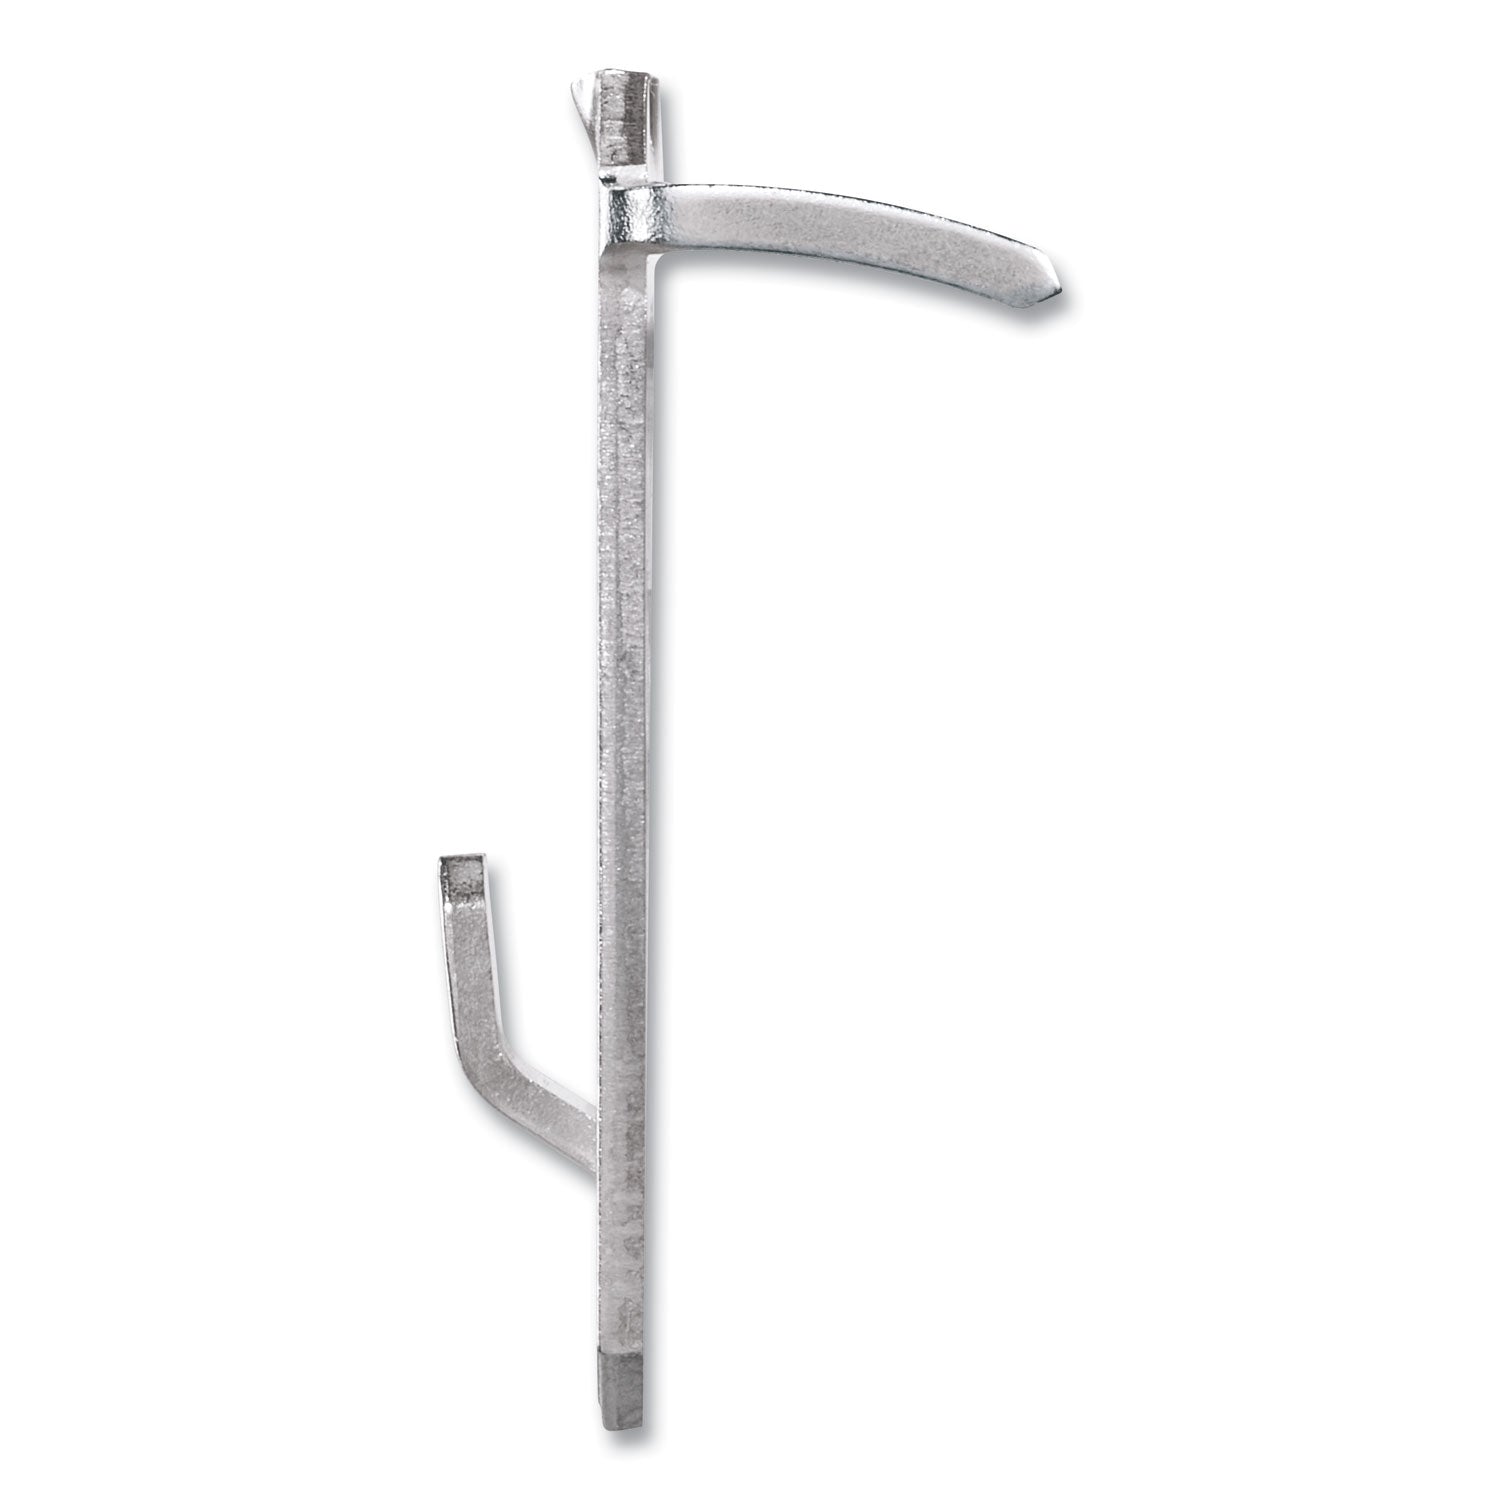 claw-drywall-picture-hanger-stainless-steel-45-lb-capacity-3-hooks-and-3-spot-markers_mmm3ph45m3es - 4